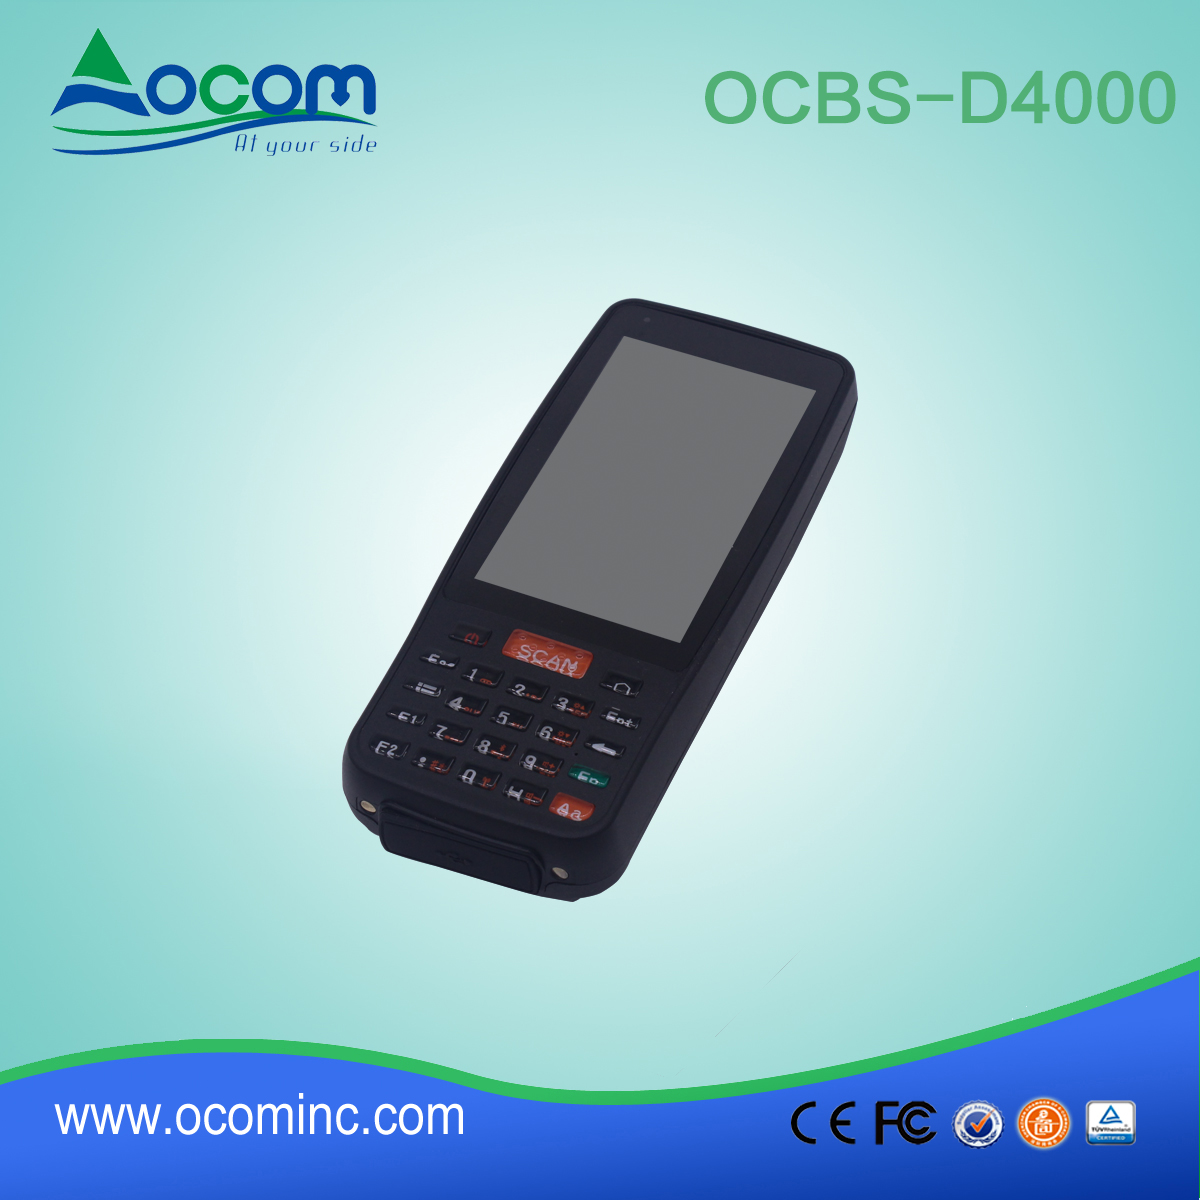 OCBS -D4000 Android-Handheld-PDA-Barcode-Scanner PDA